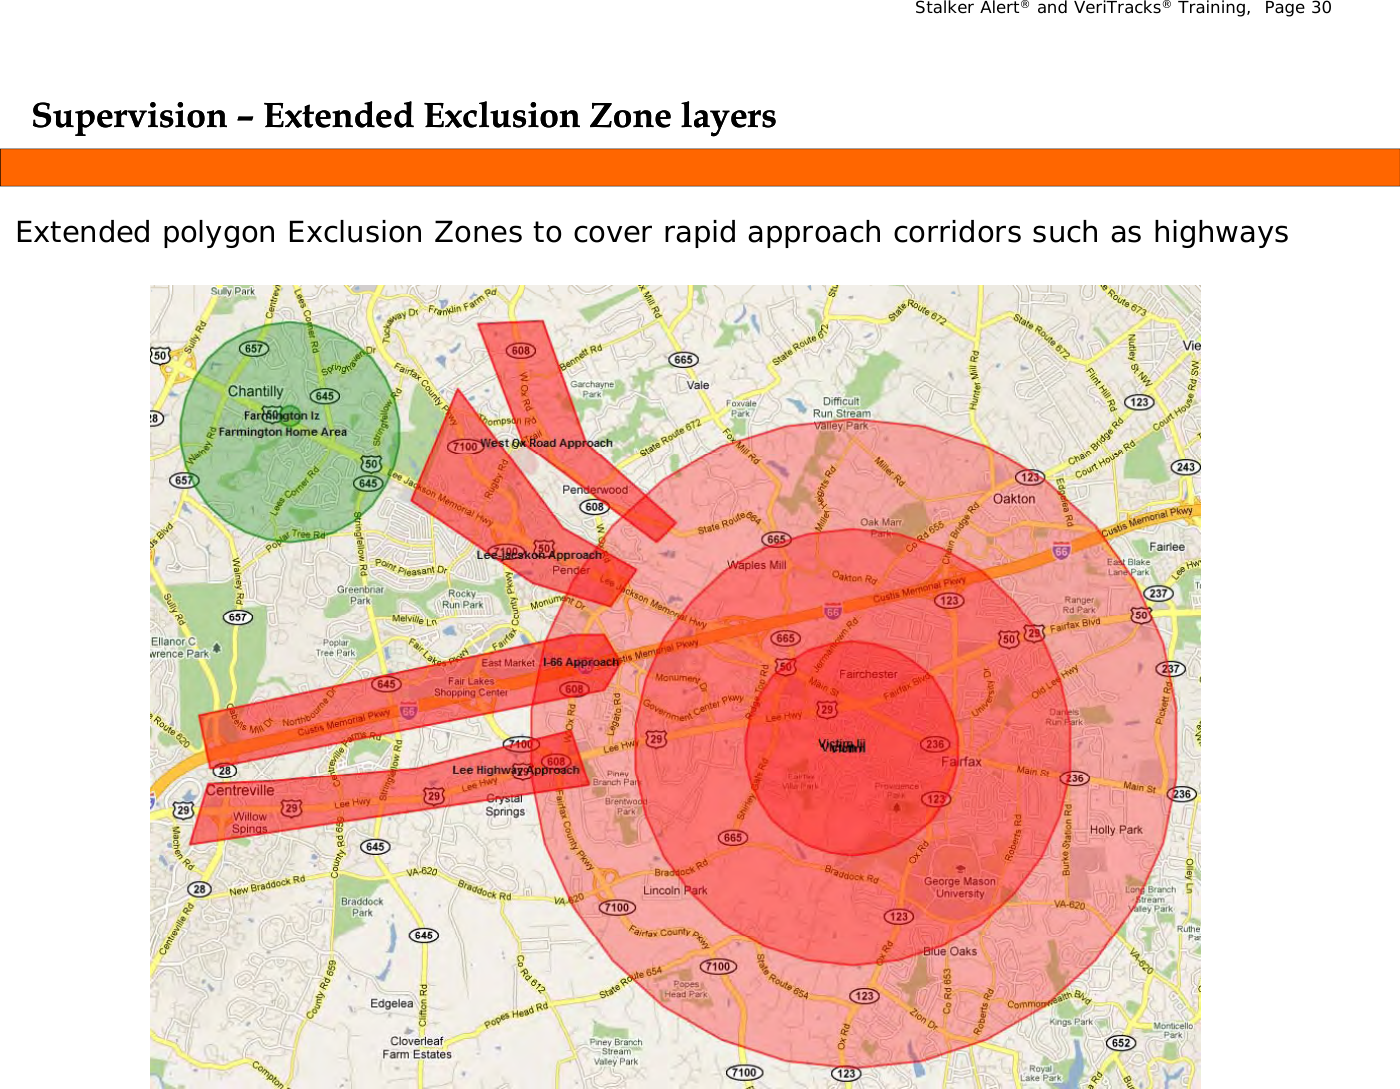 Stalker Alert®and VeriTracks®Training,  Page 30Supervision Supervision –– Extended Exclusion Zone layersExtended Exclusion Zone layersppyyExtended polygon Exclusion Zones to cover rapid approach corridors such as highways 